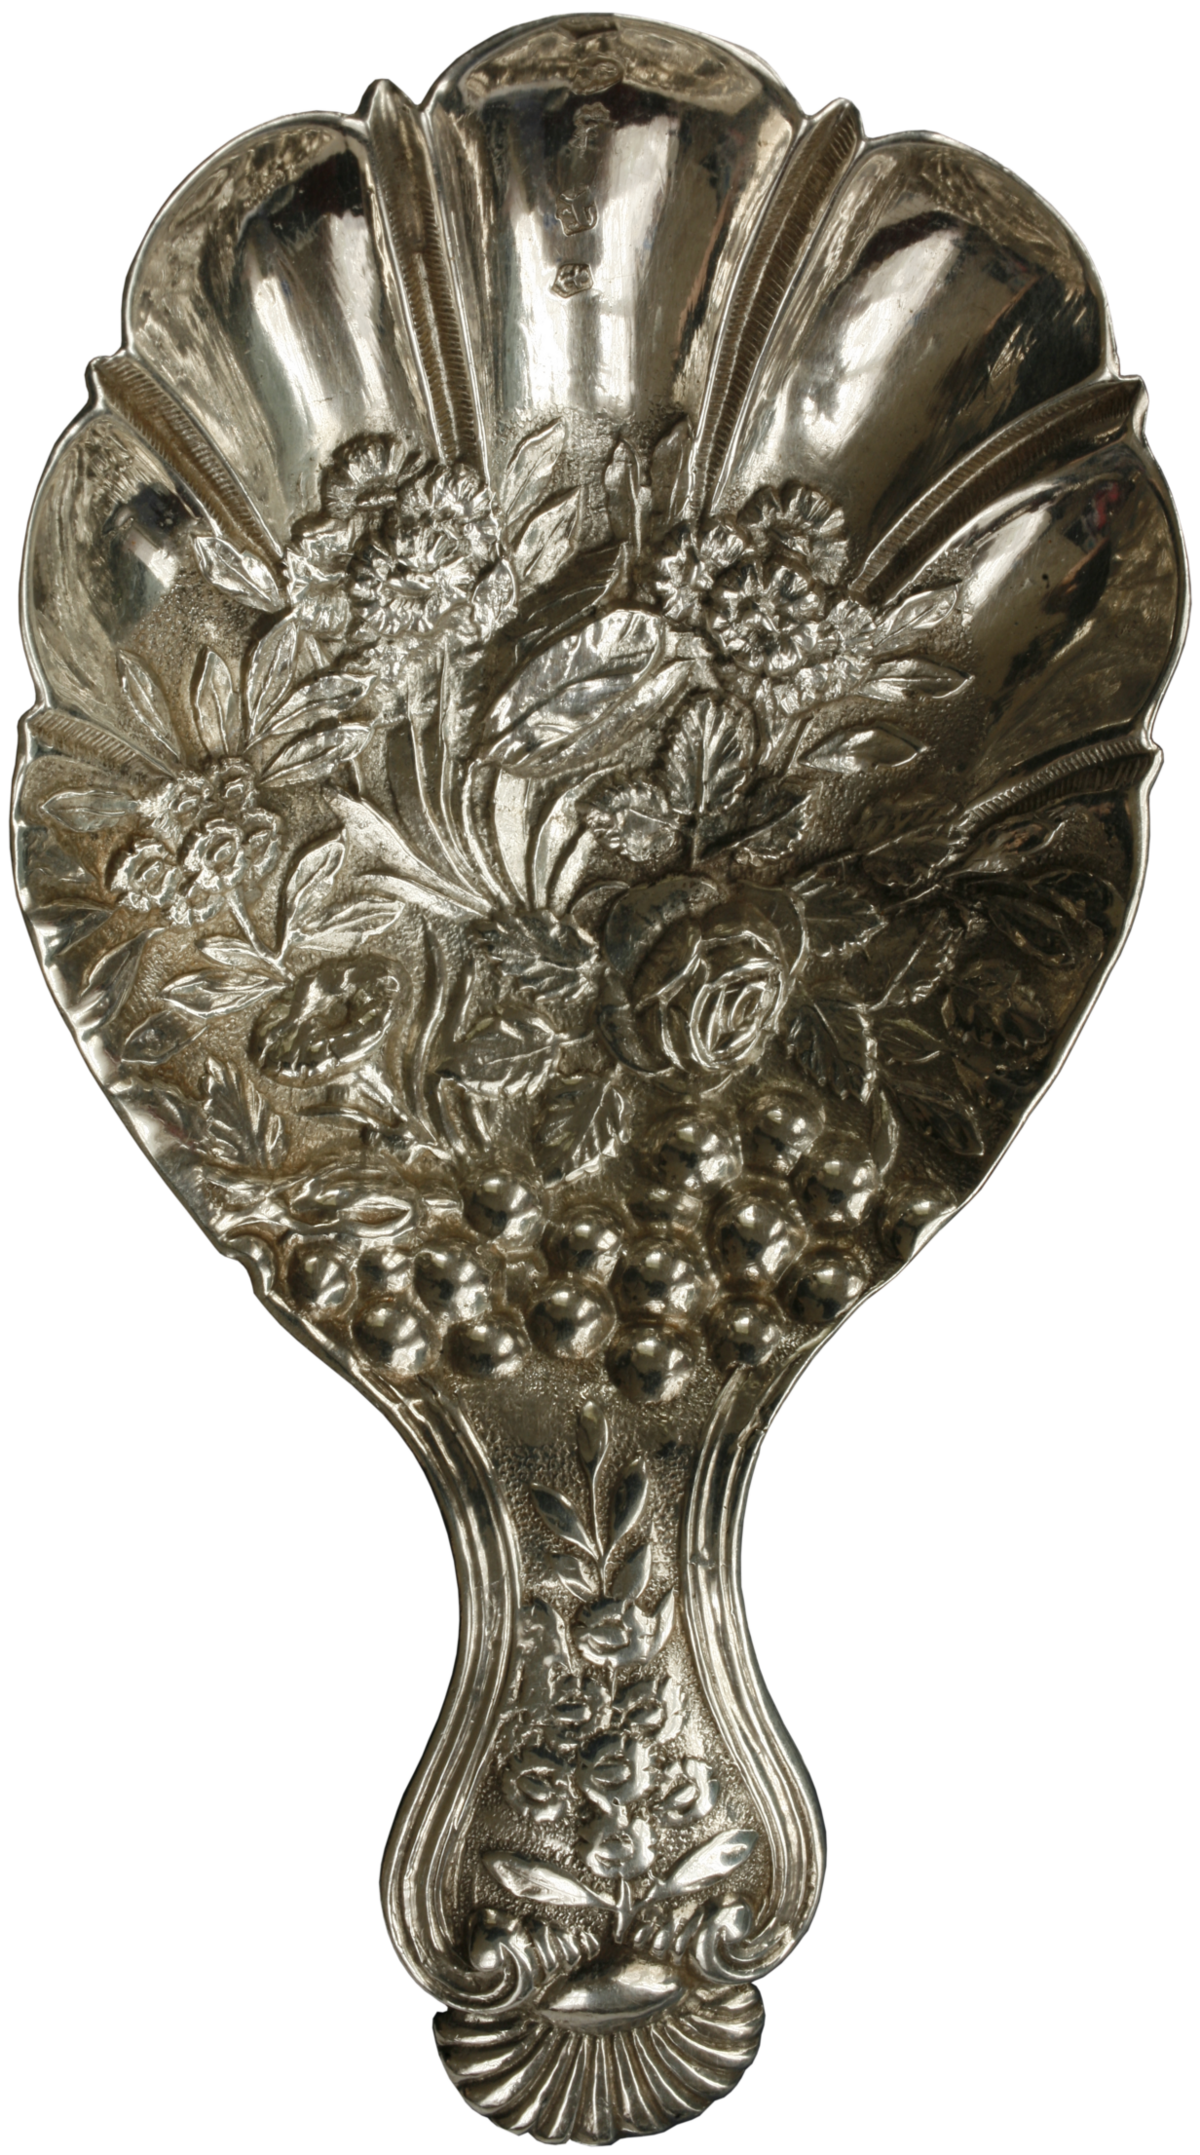 https://upload.wikimedia.org/wikipedia/commons/thumb/3/35/SilverTeaCaddySpoon.png/1200px-SilverTeaCaddySpoon.png